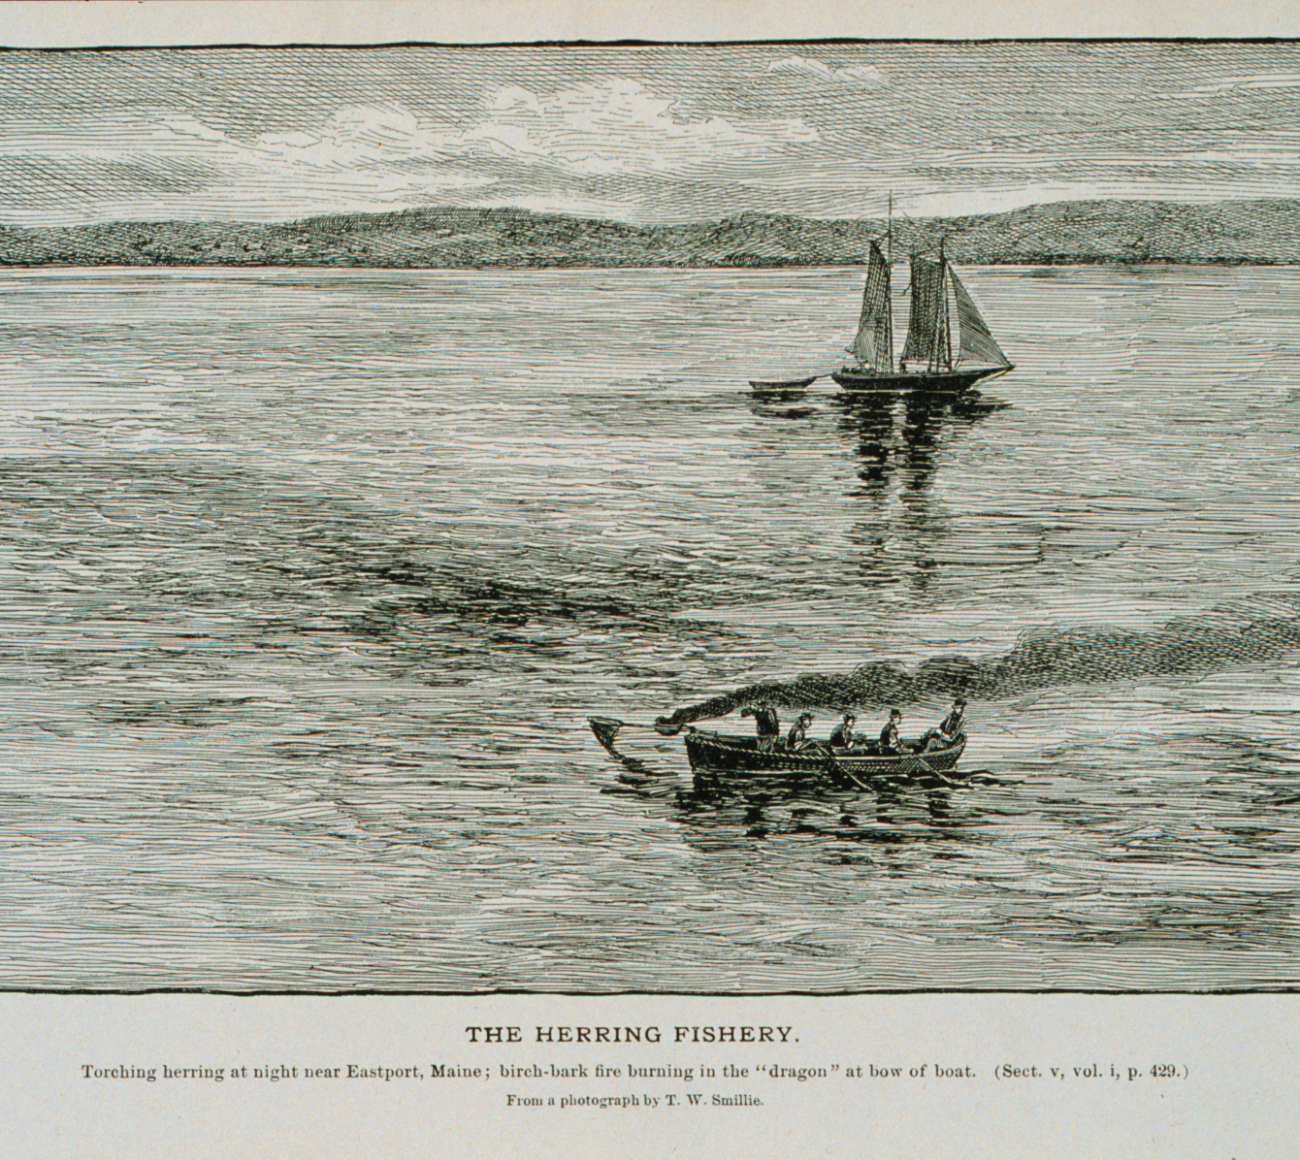 Torching herring at night near Eastport, MaineFrom a photograph by T